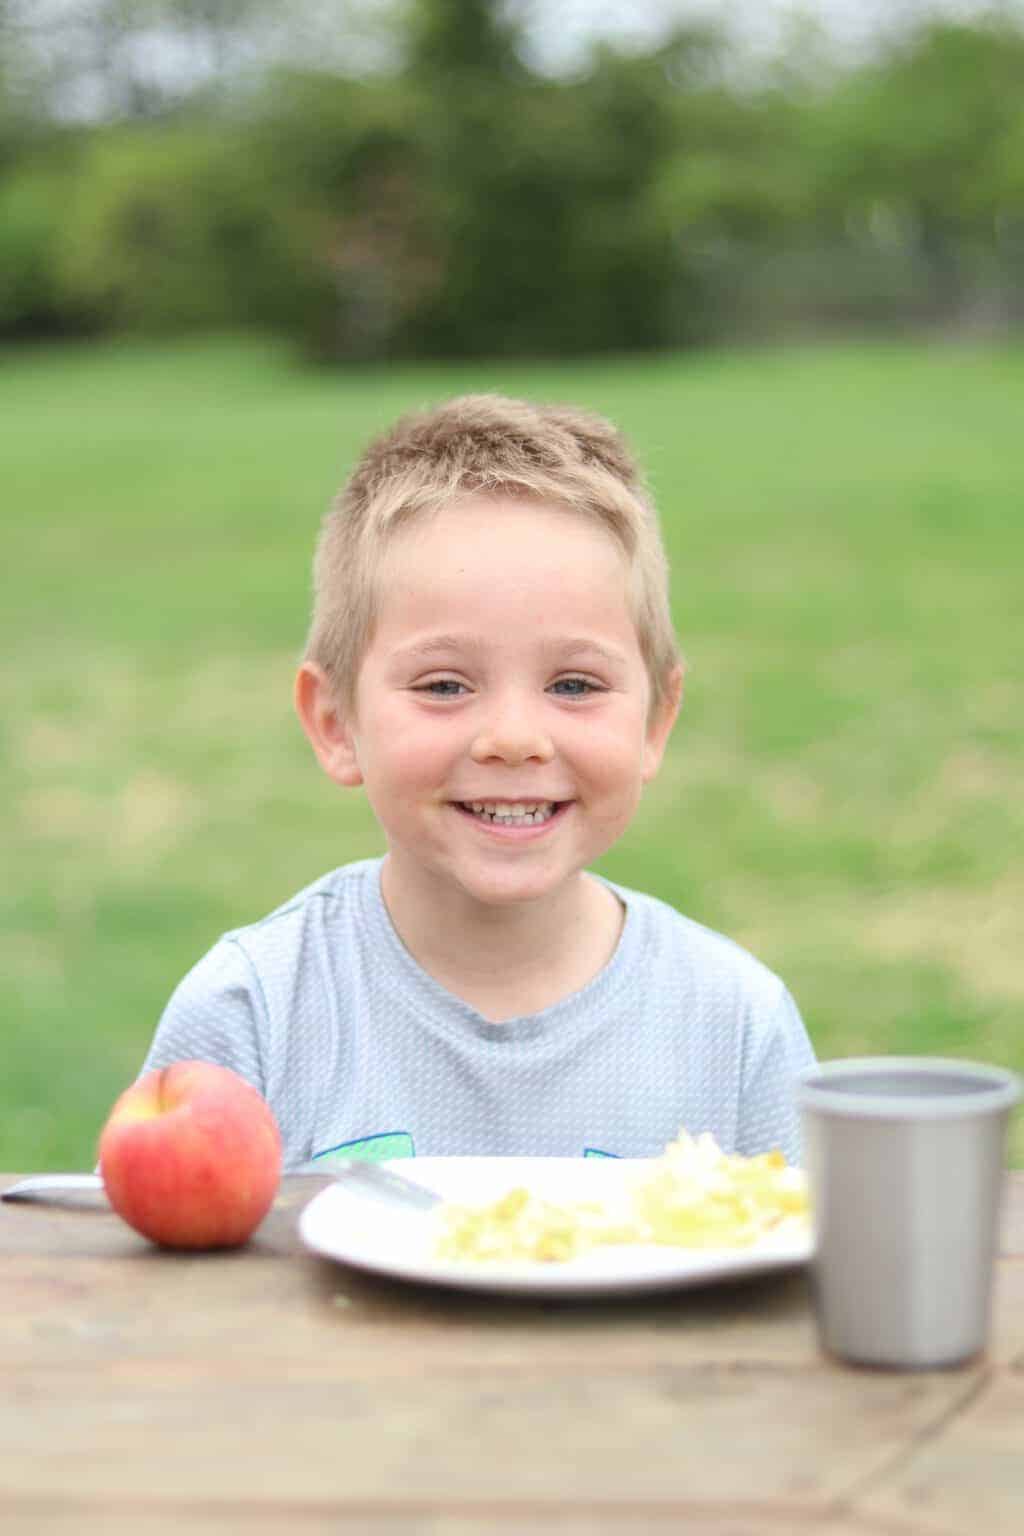 A little boy eating a healthy meal outside.